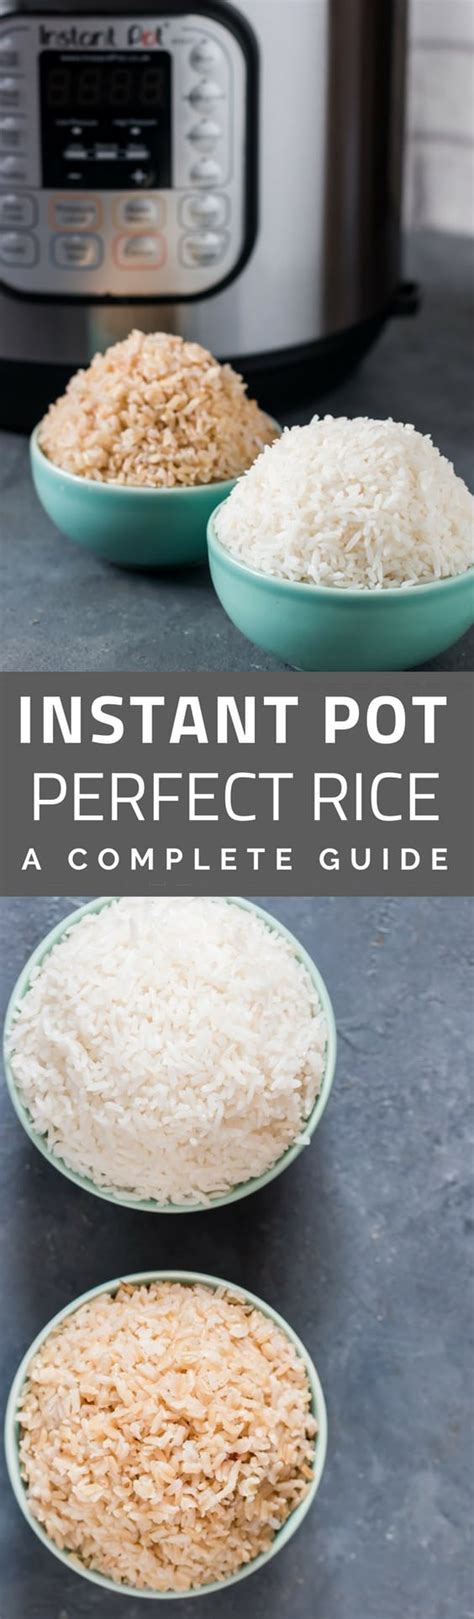 Perfecting Rice In Instant Pot Needs A Few Tips And Tricks This Basic